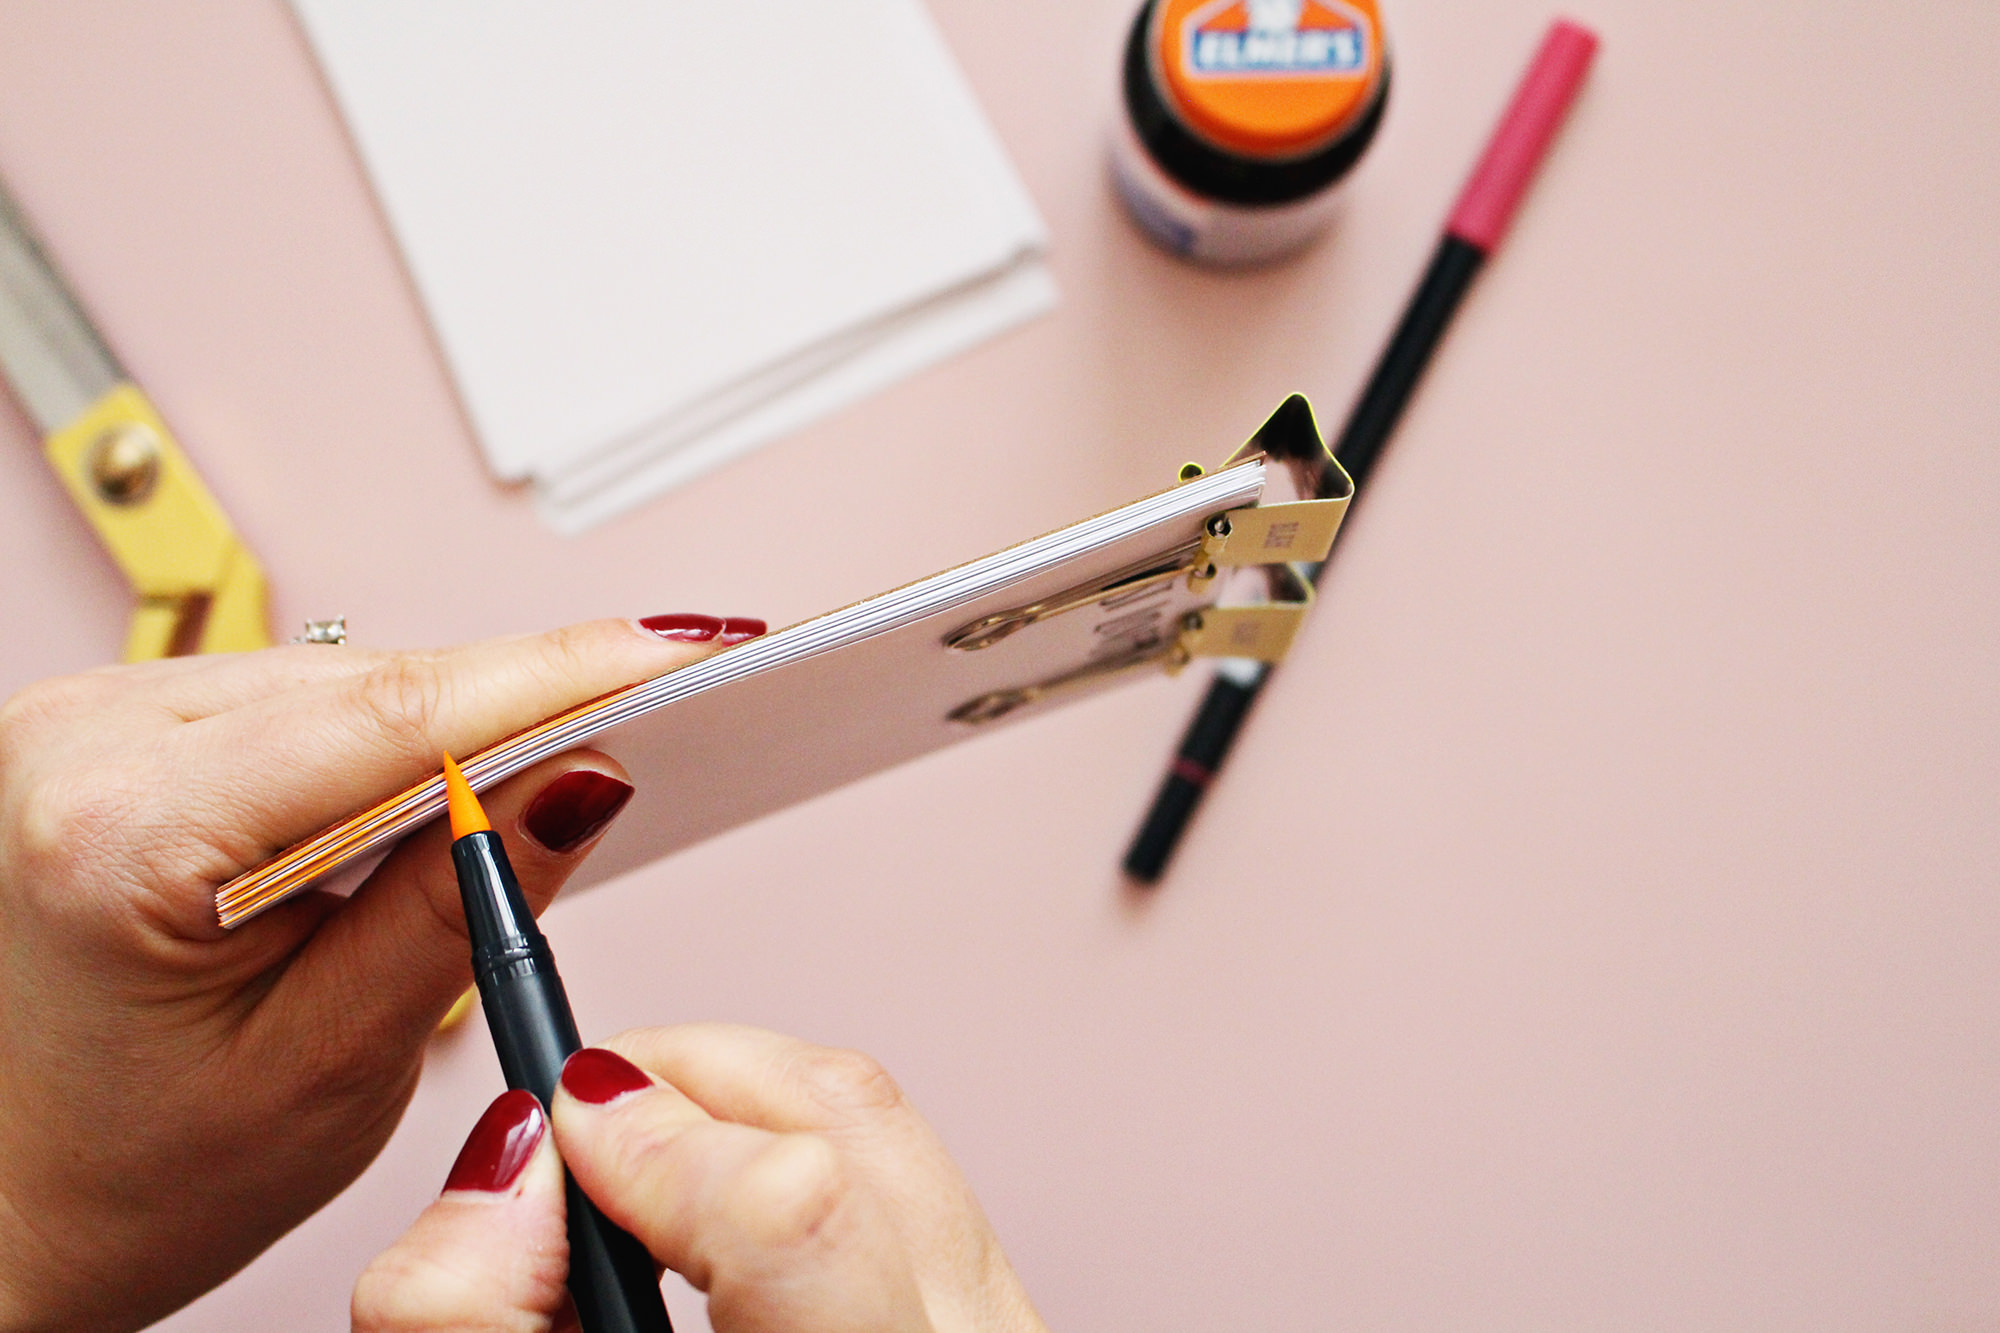 For an extra pop of color, use a marker to color the edges of the pages of your DIY notepad